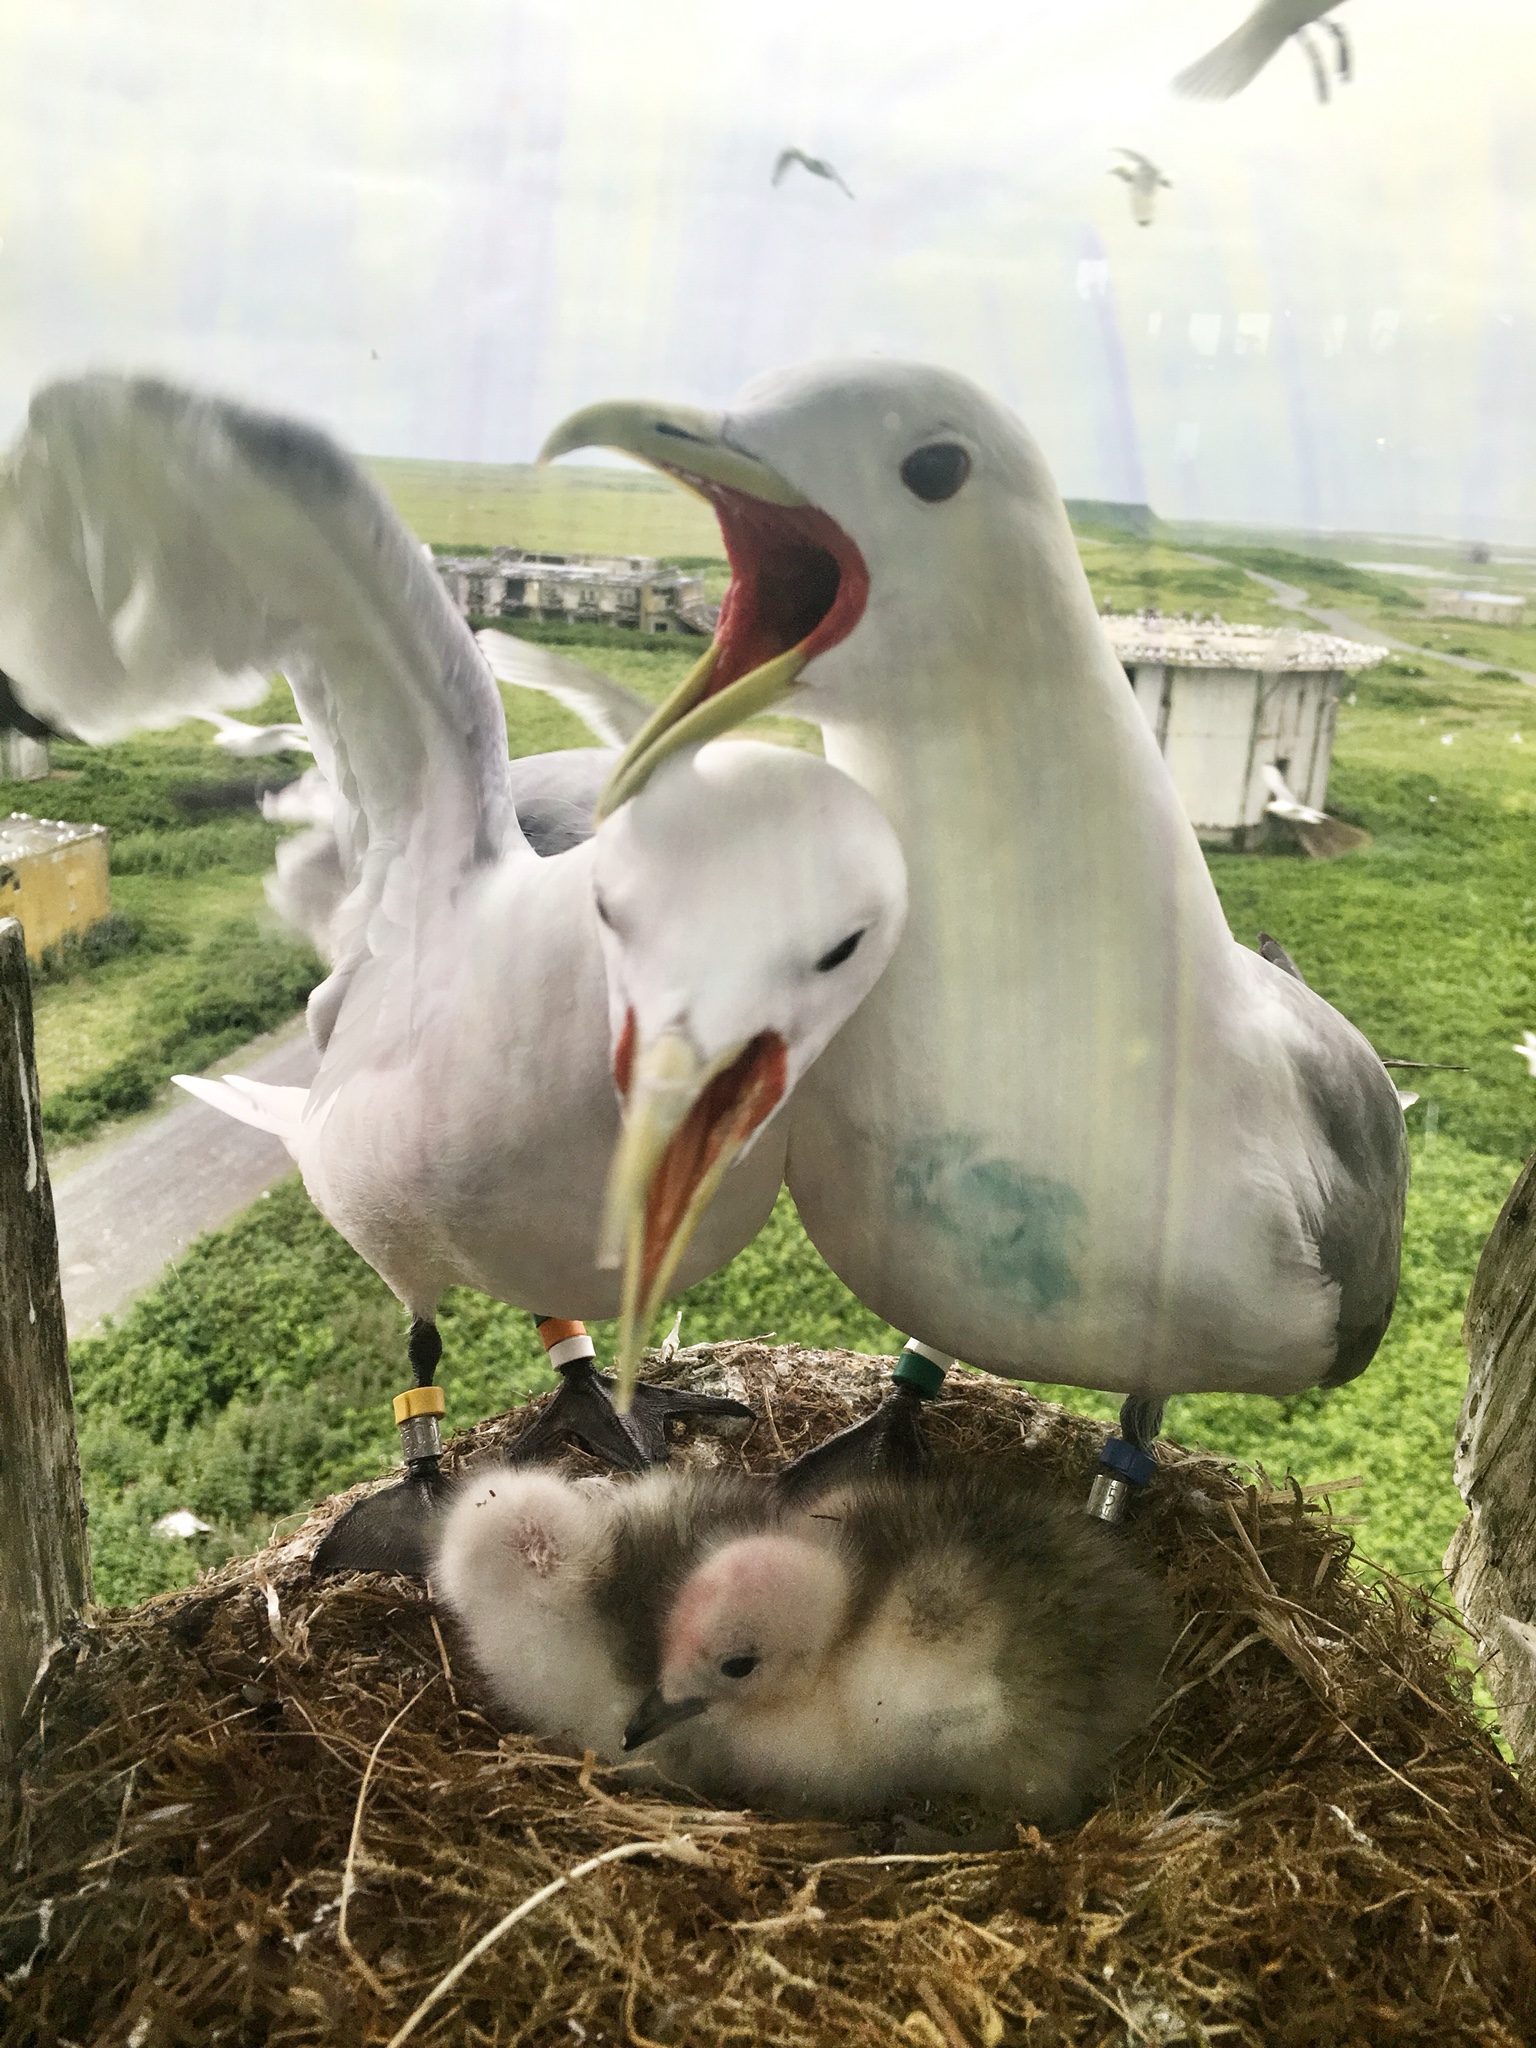 Two adult kittiwakes with beaks open (white gulls with black legs, grey wings, yellow beaks and bright orange skin inside their mouths) stand at a nest with two chicks (white, fluffy, black beaks) below them. Behind them green vegetation and other structures are visible - this nest is high up. 